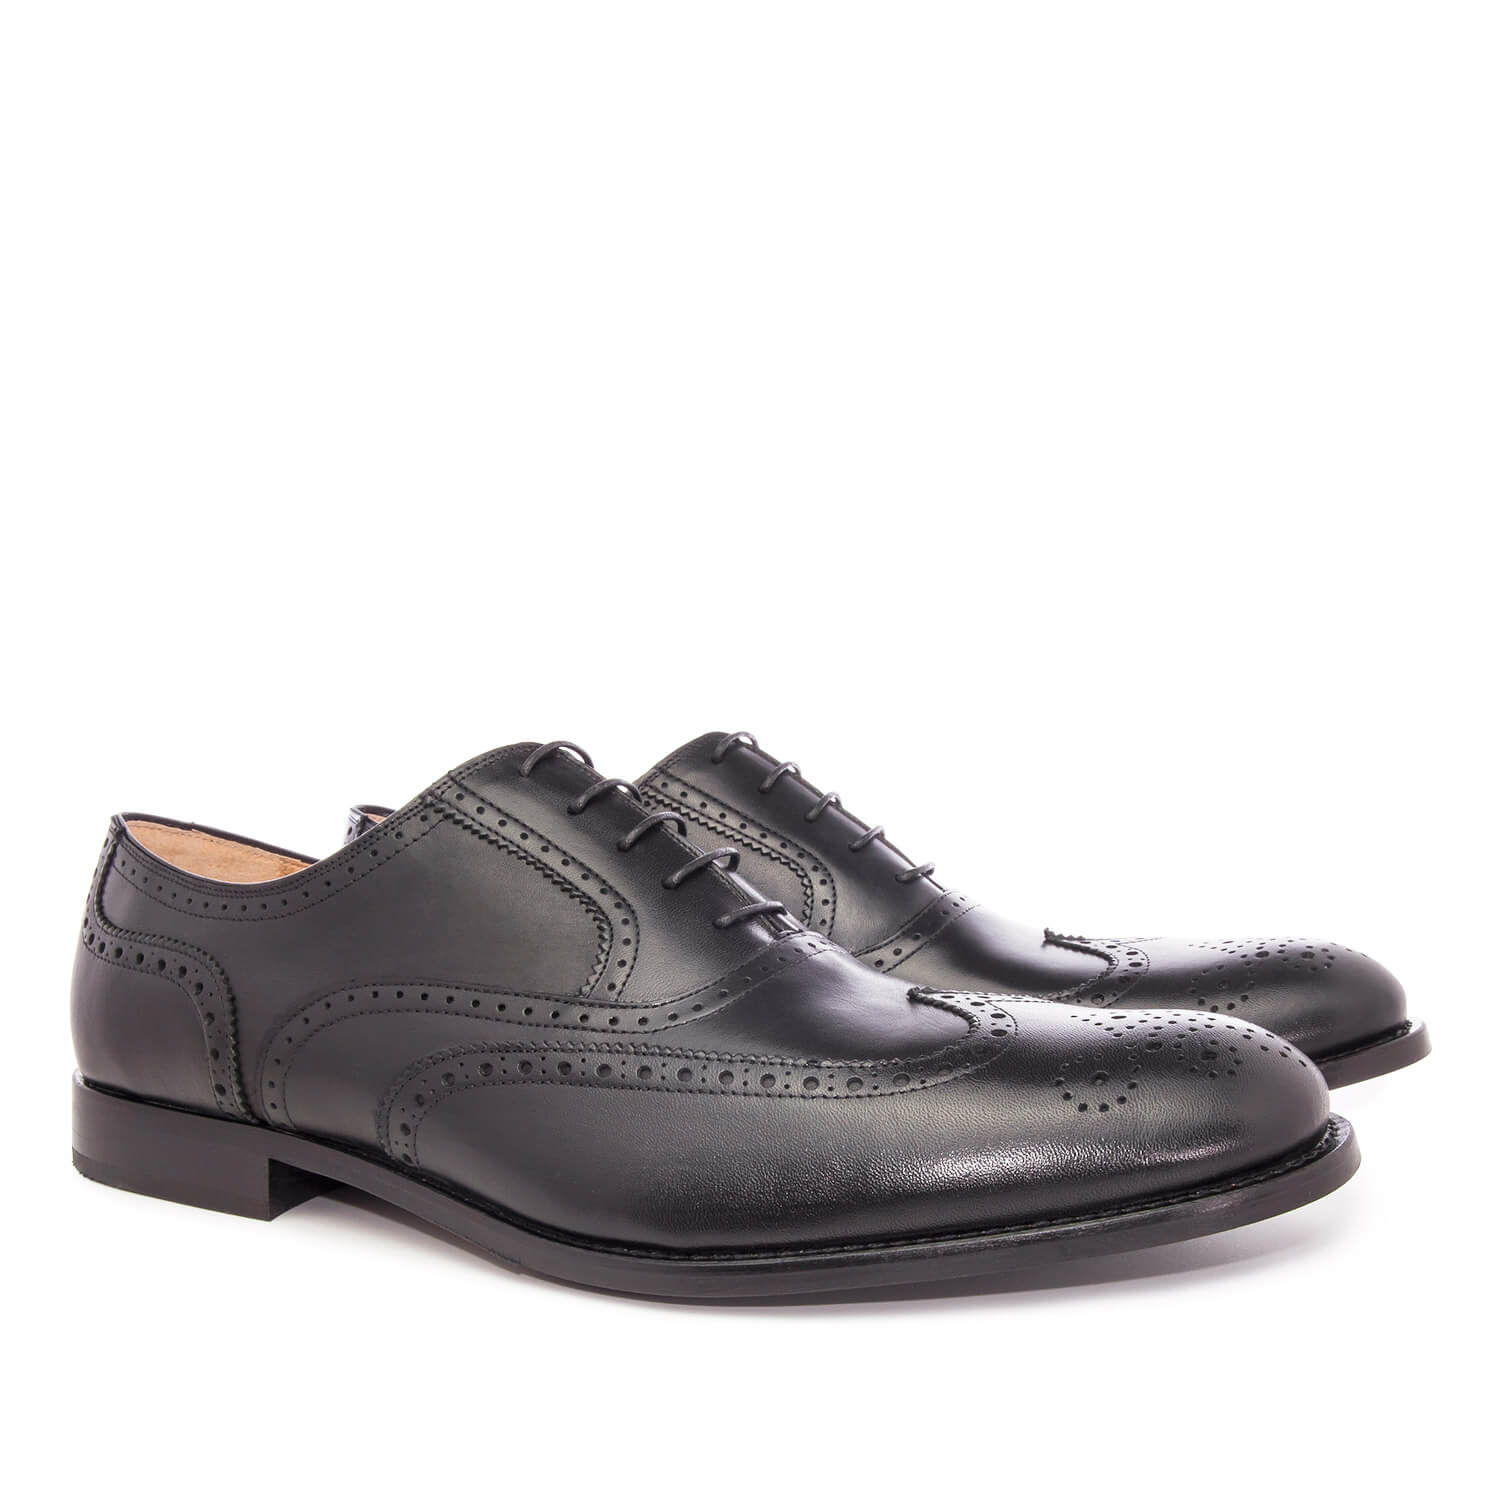 Mens Oxford shoes in Black Leather 